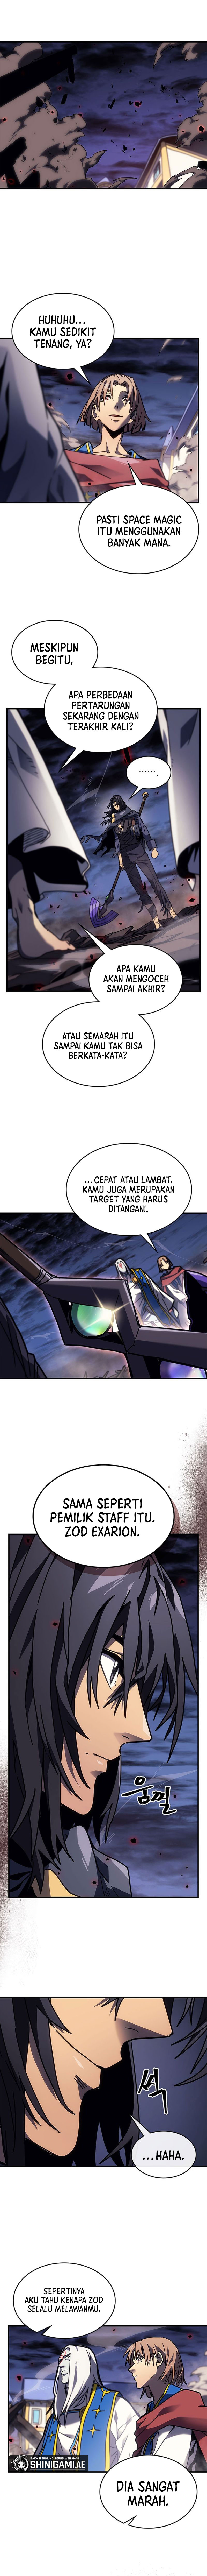 a-returners-magic-should-be-special-indo Chapter 249